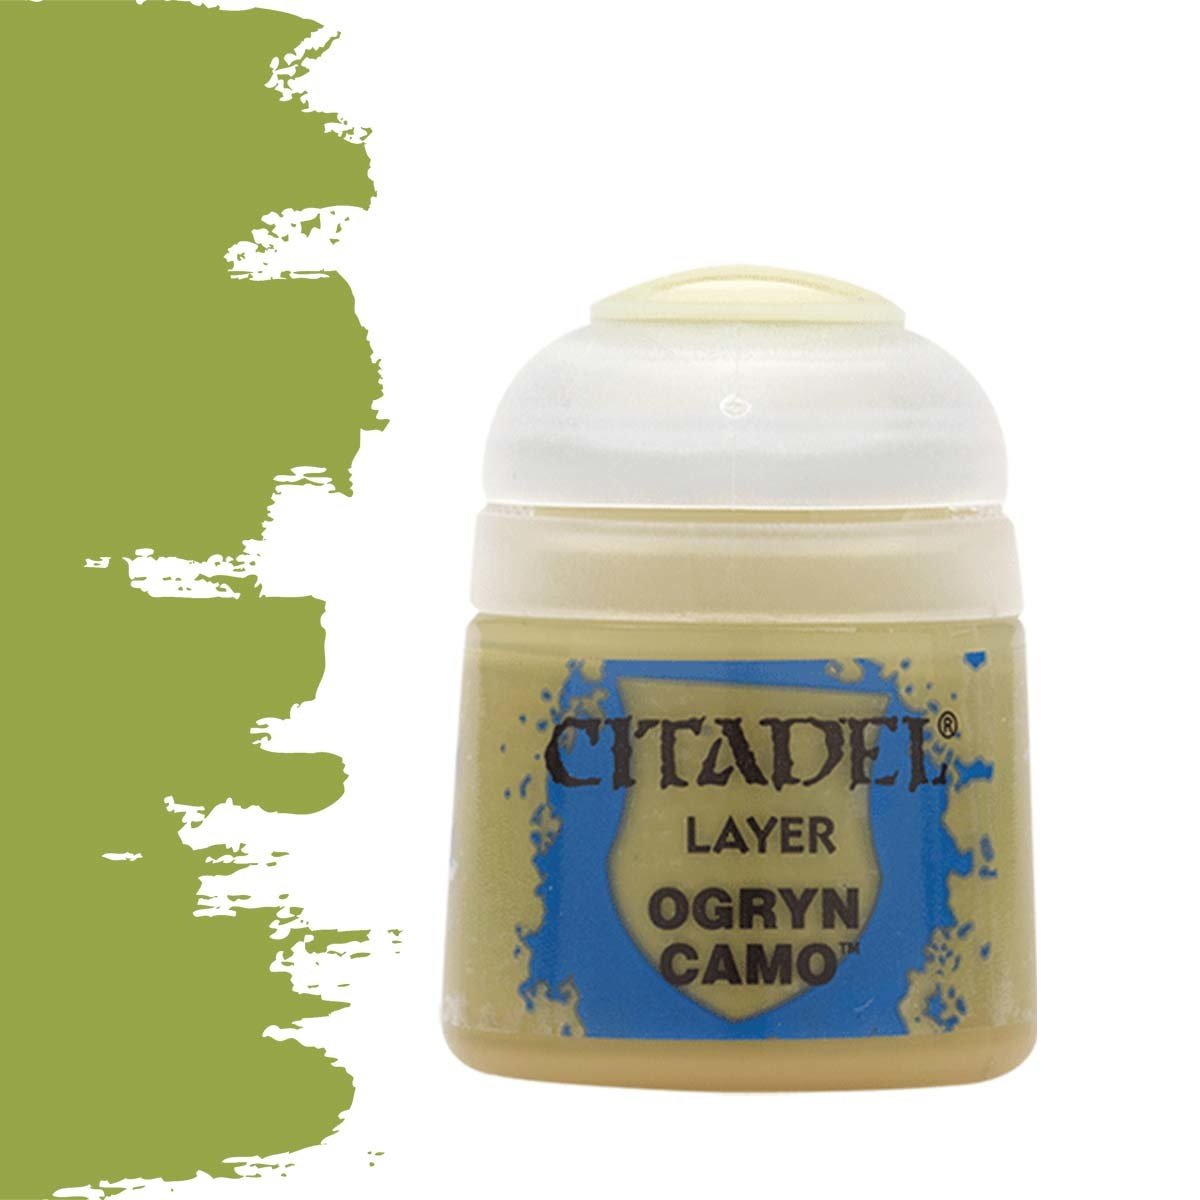 Citadel Ogryn Camo - Layer Paint - 12ml - 22-31 - Buy now at Scenery ...